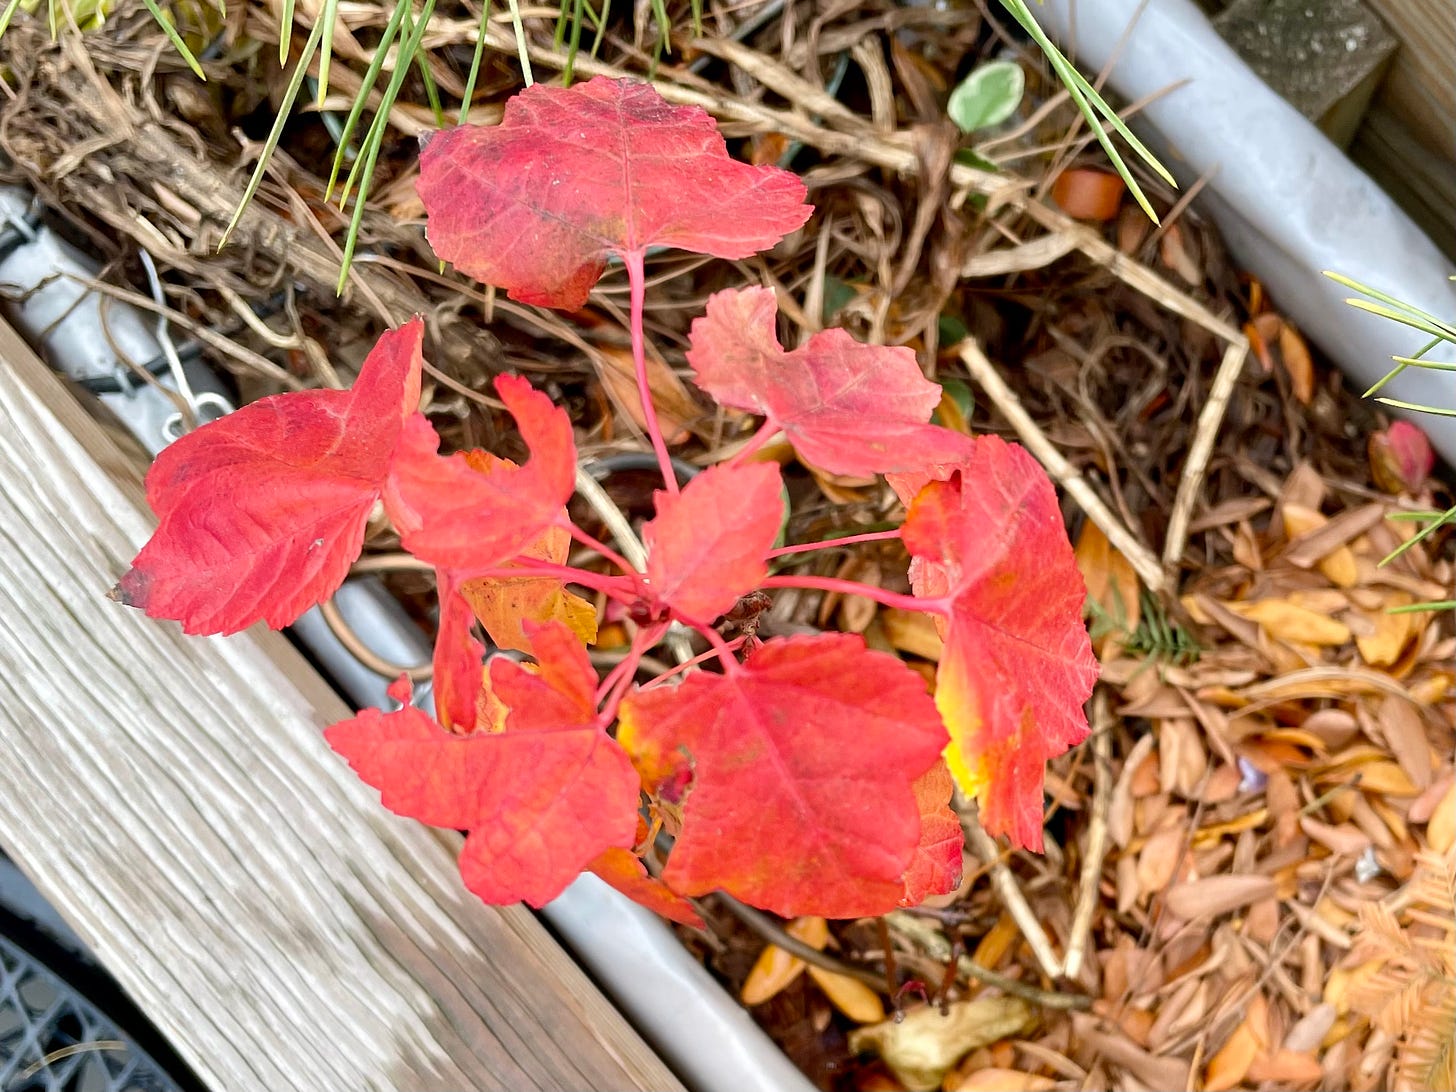 ID: Red maple showing red and orange fall colors